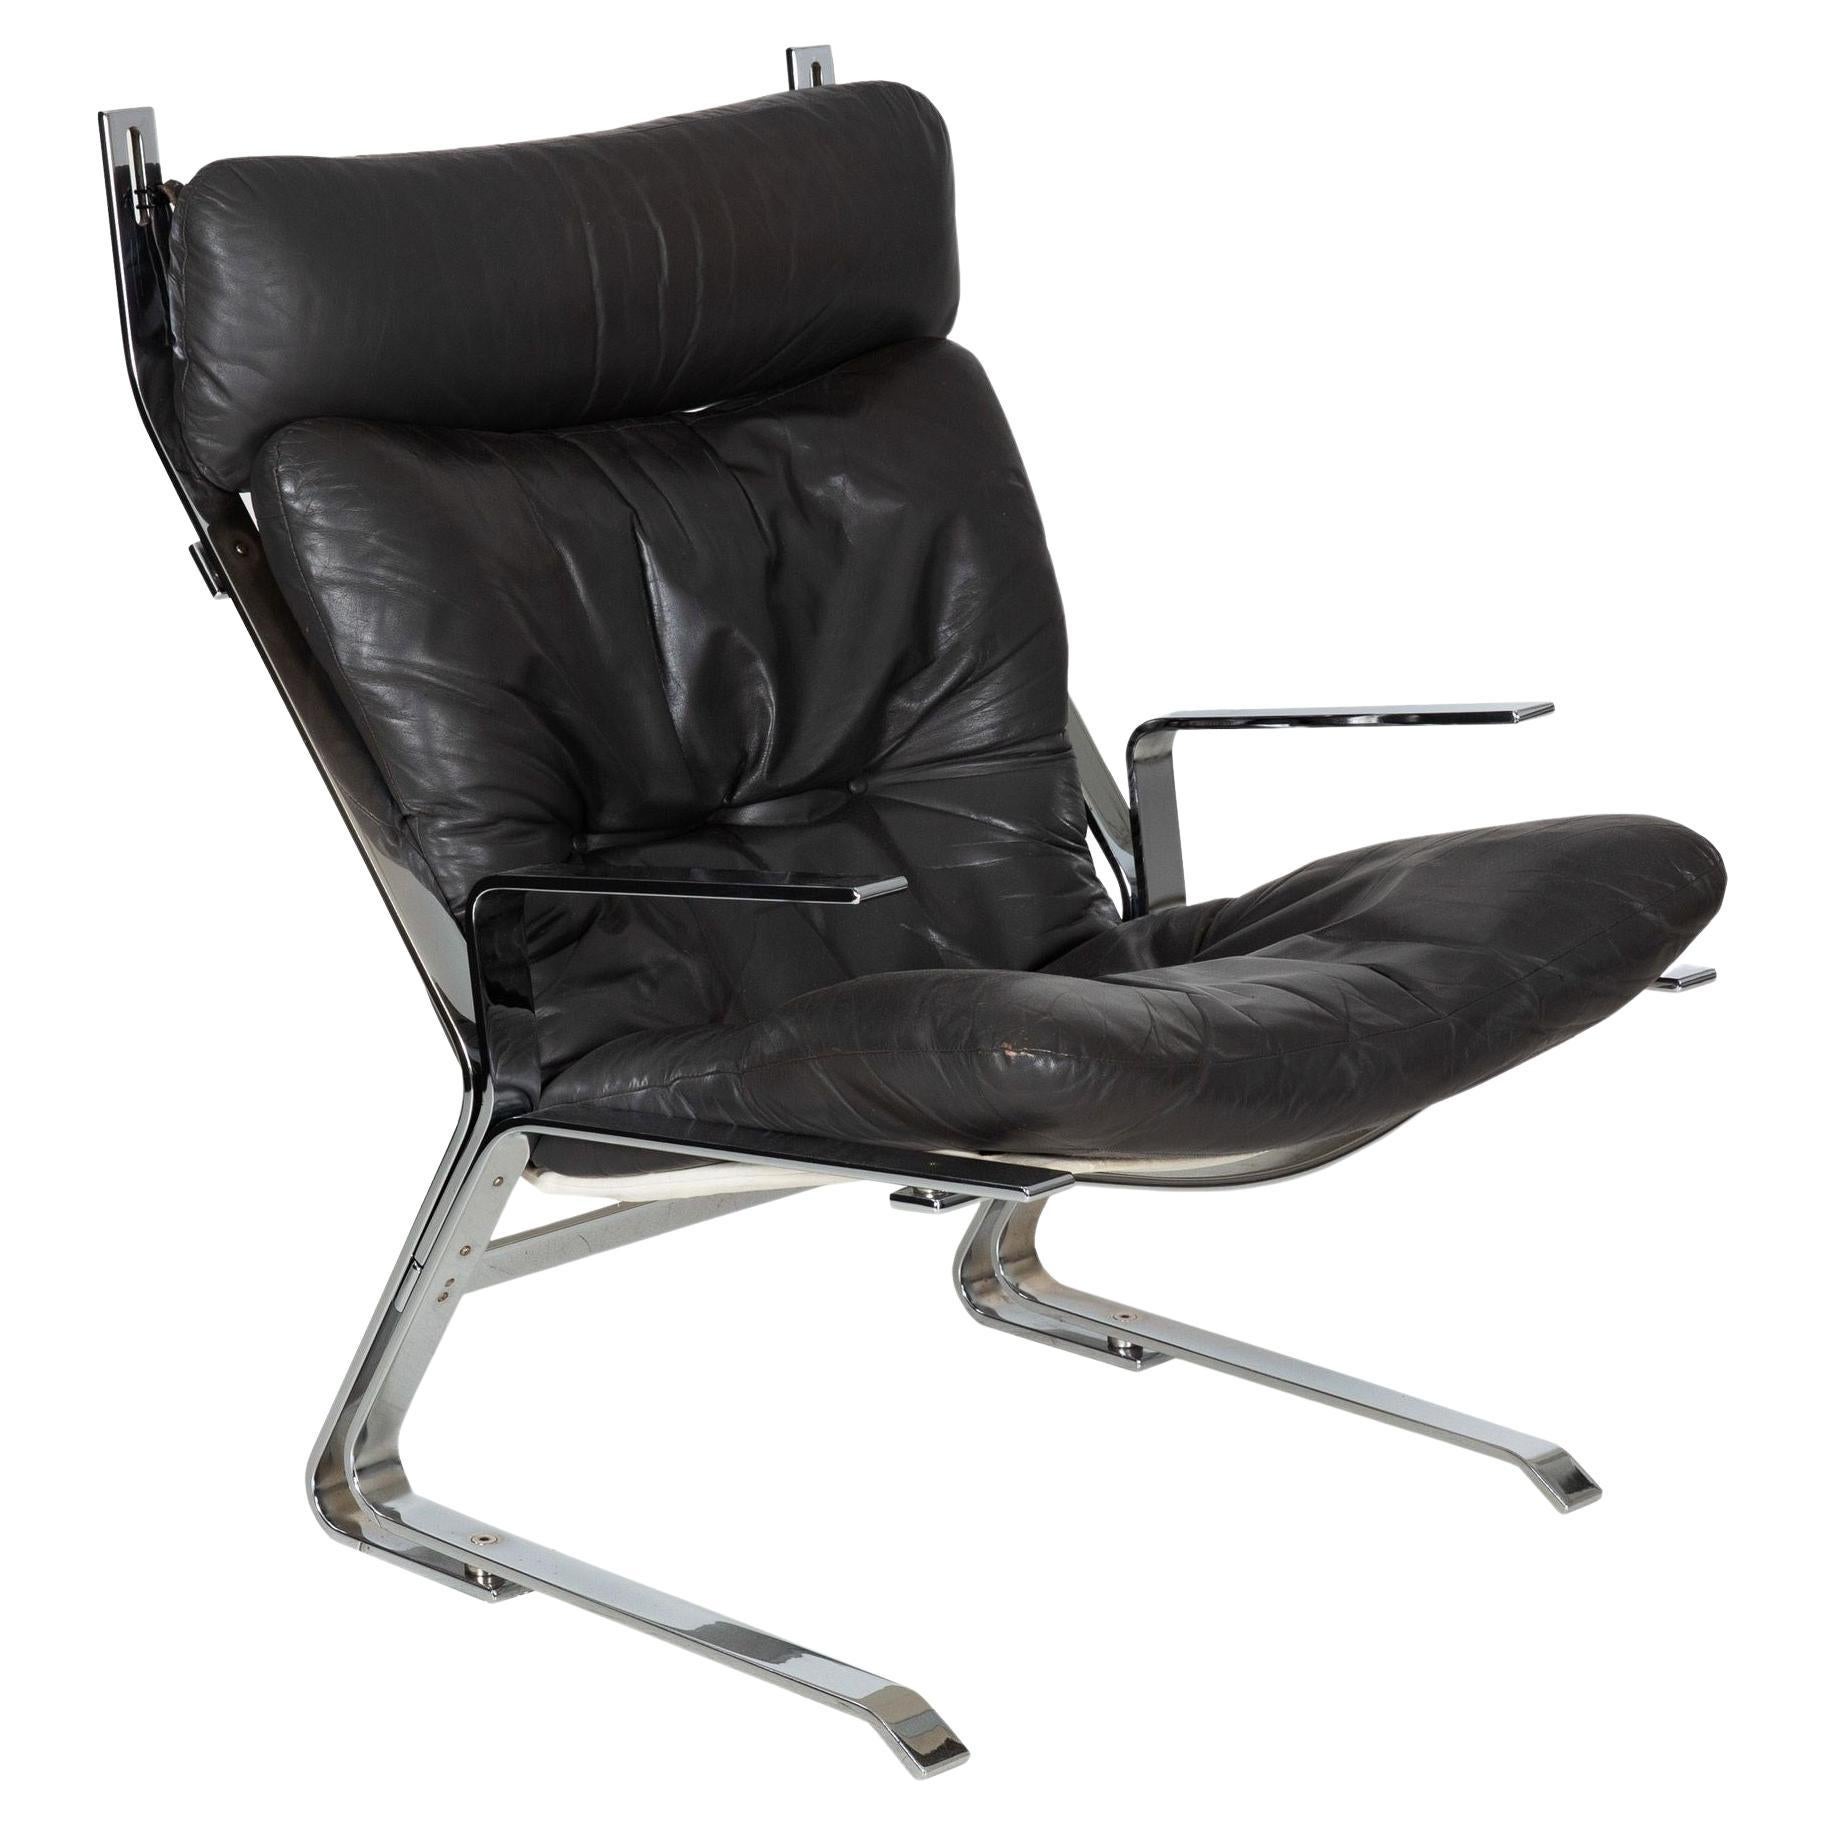 1960s Leather & Chrome “Pirate” Lounge Chair, Elsa & Nordahl Solheim